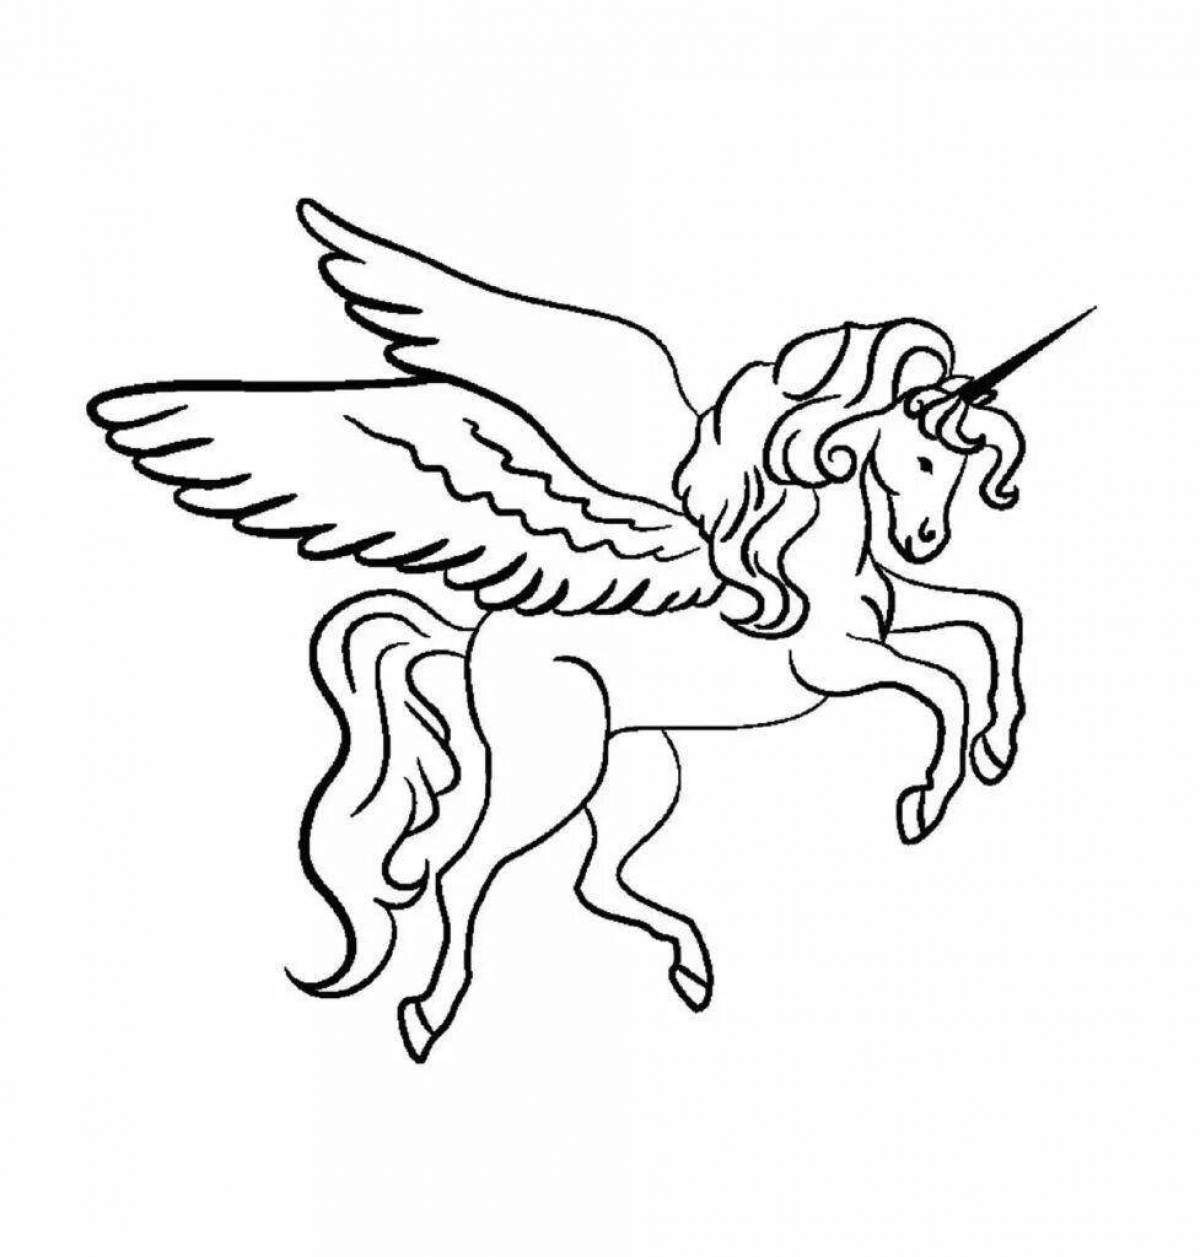 Coloring book funny flying unicorns